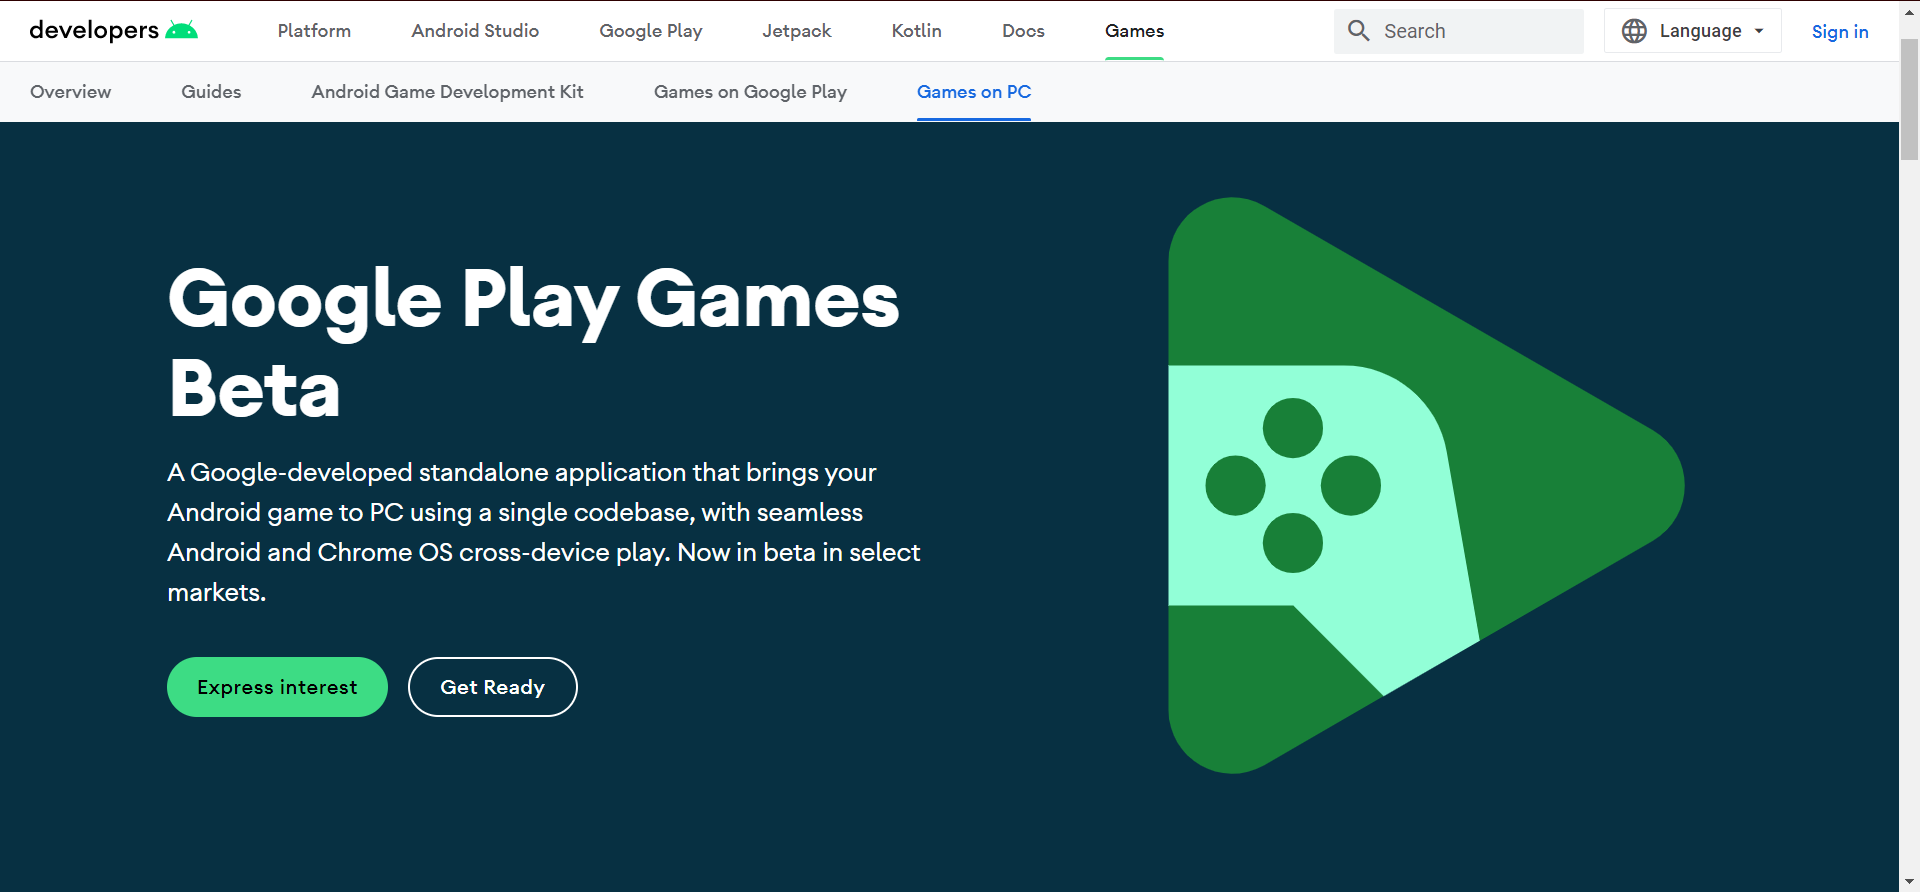 Google Play Games beta now on Windows desktops, if that's your thing